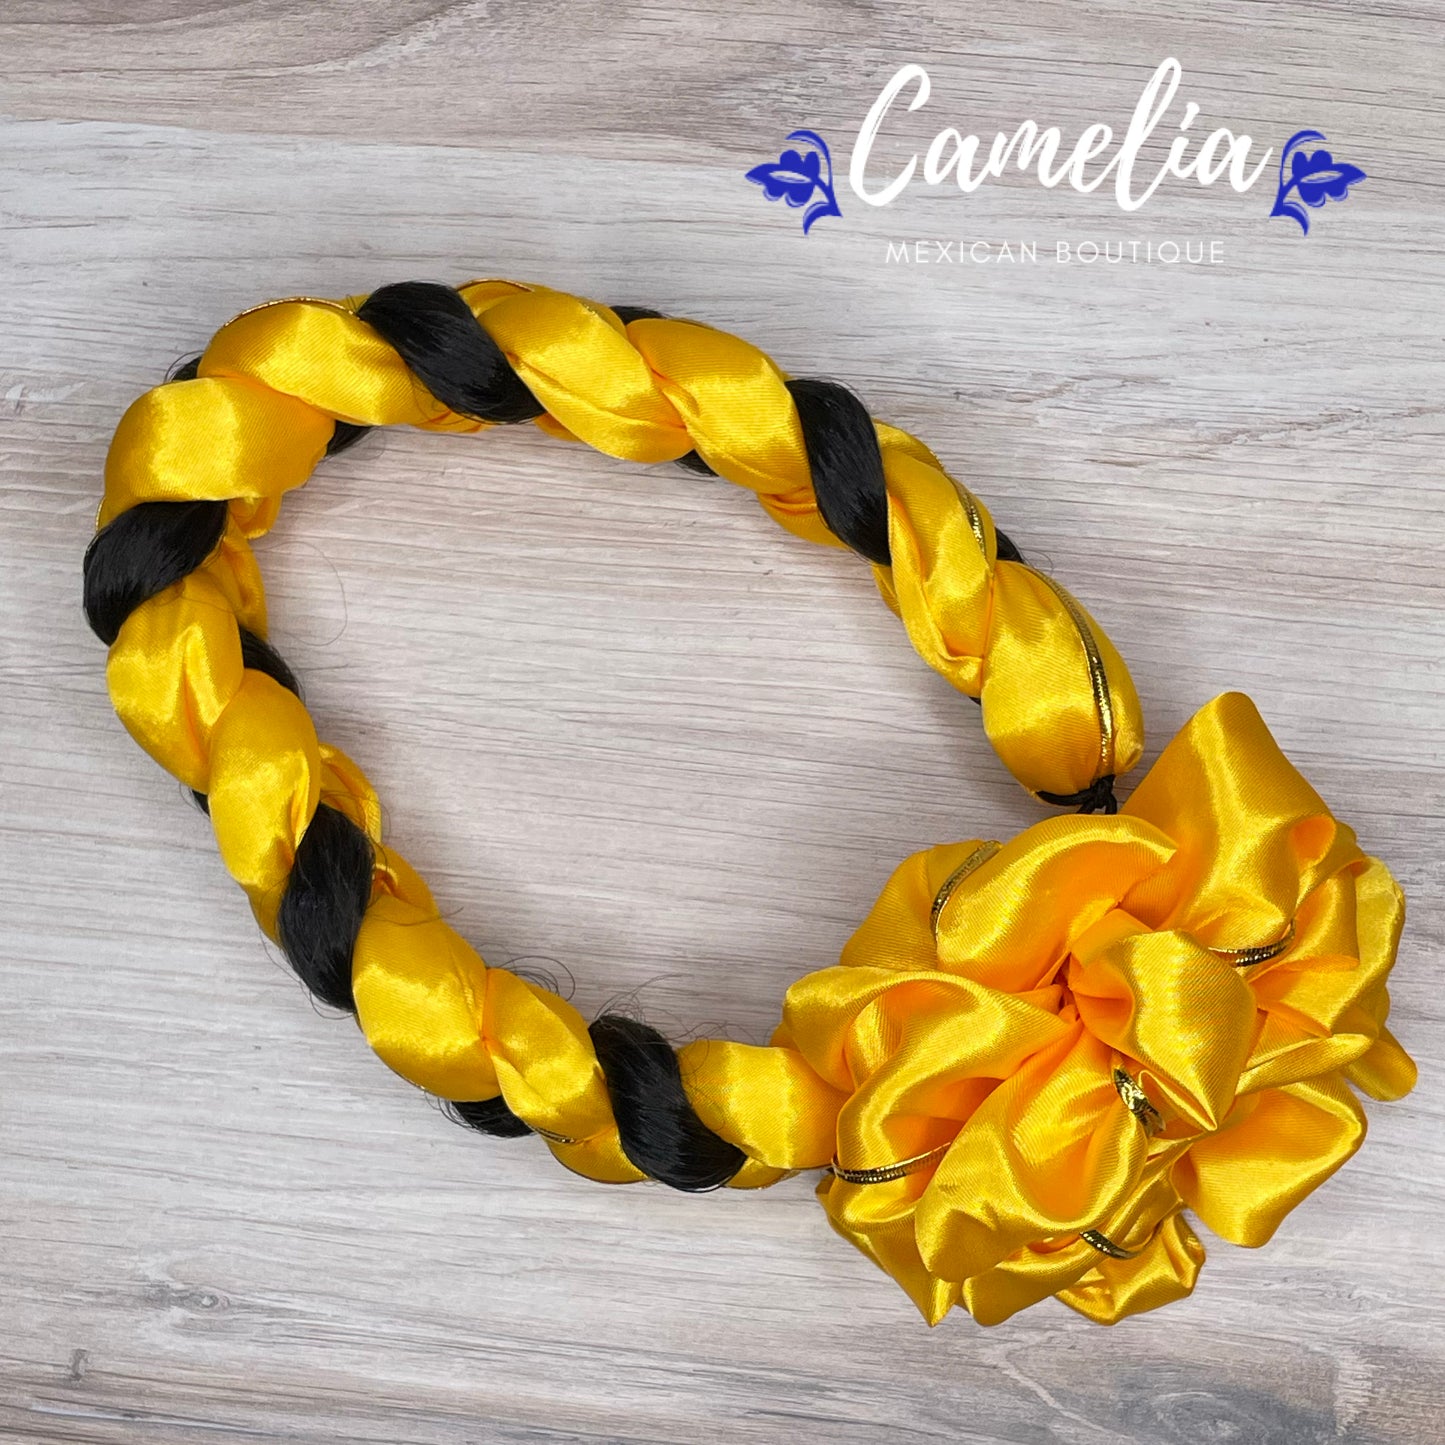 Mexican Braided Headpiece with Faux Hair